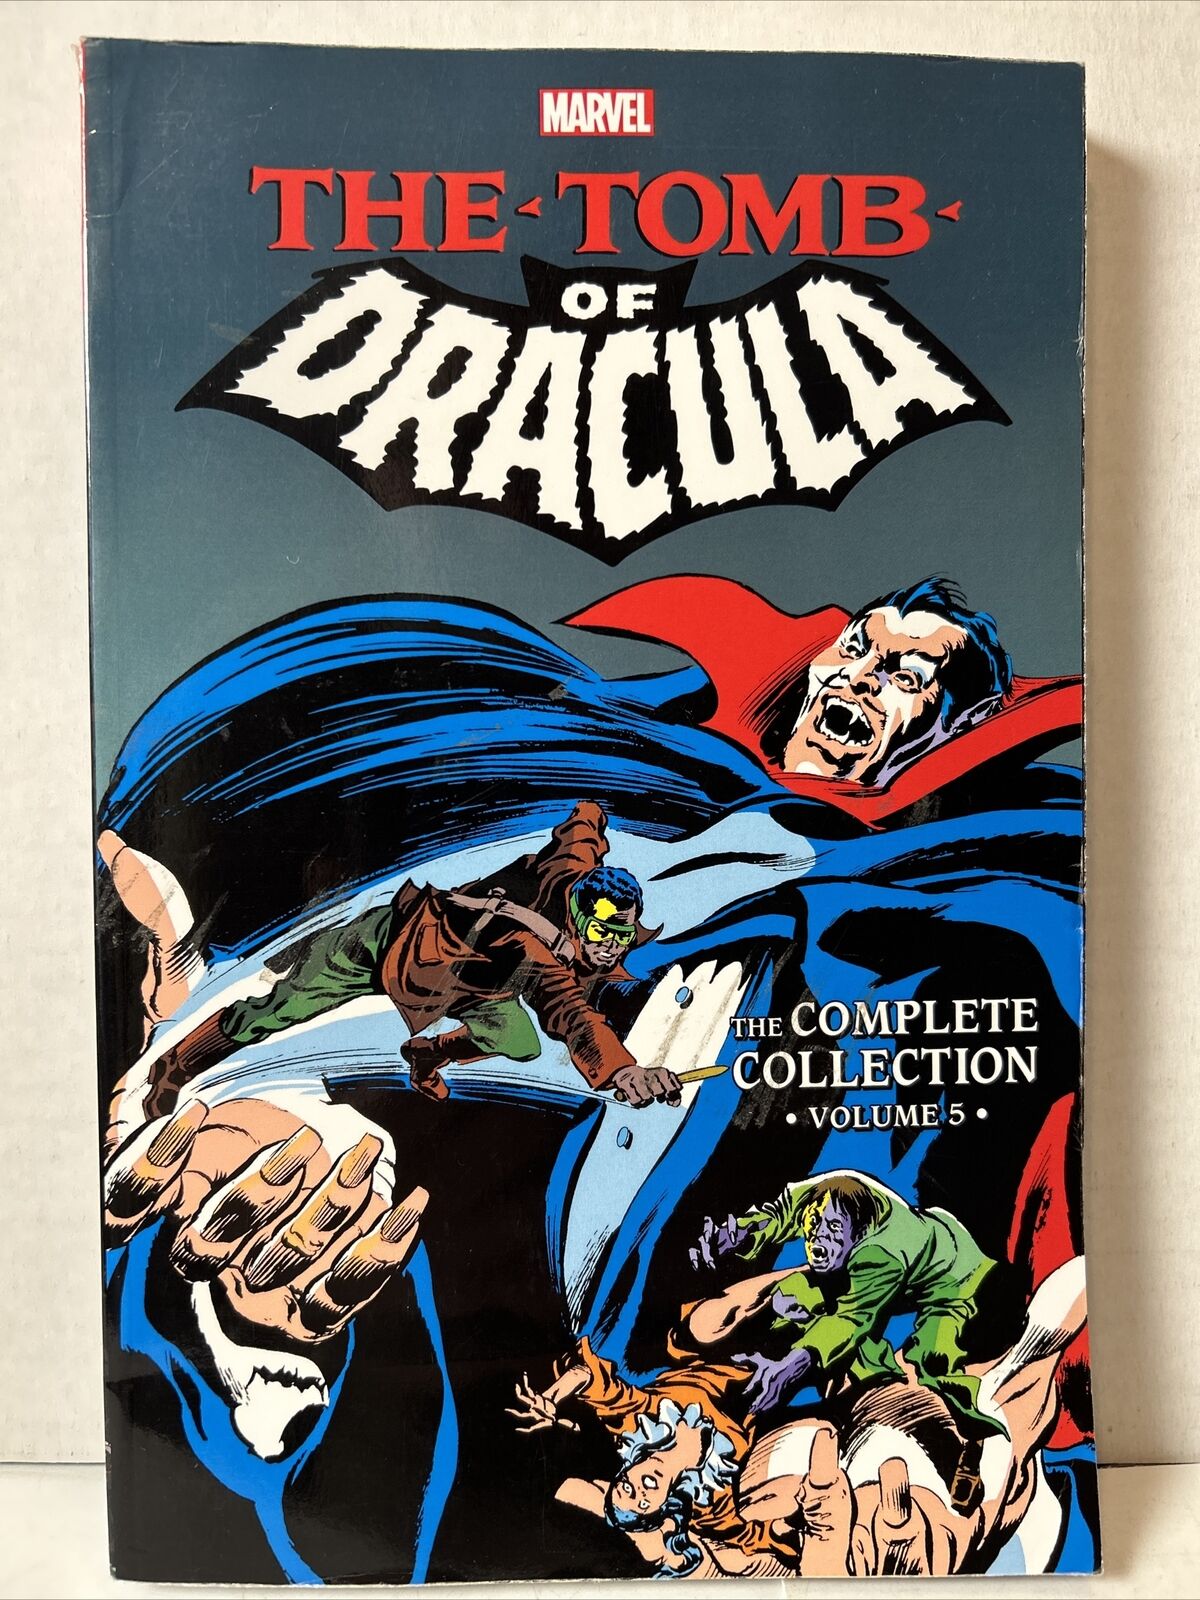 Tomb of Dracula: The Complete Collection #5 (Marvel, 2021) Blade